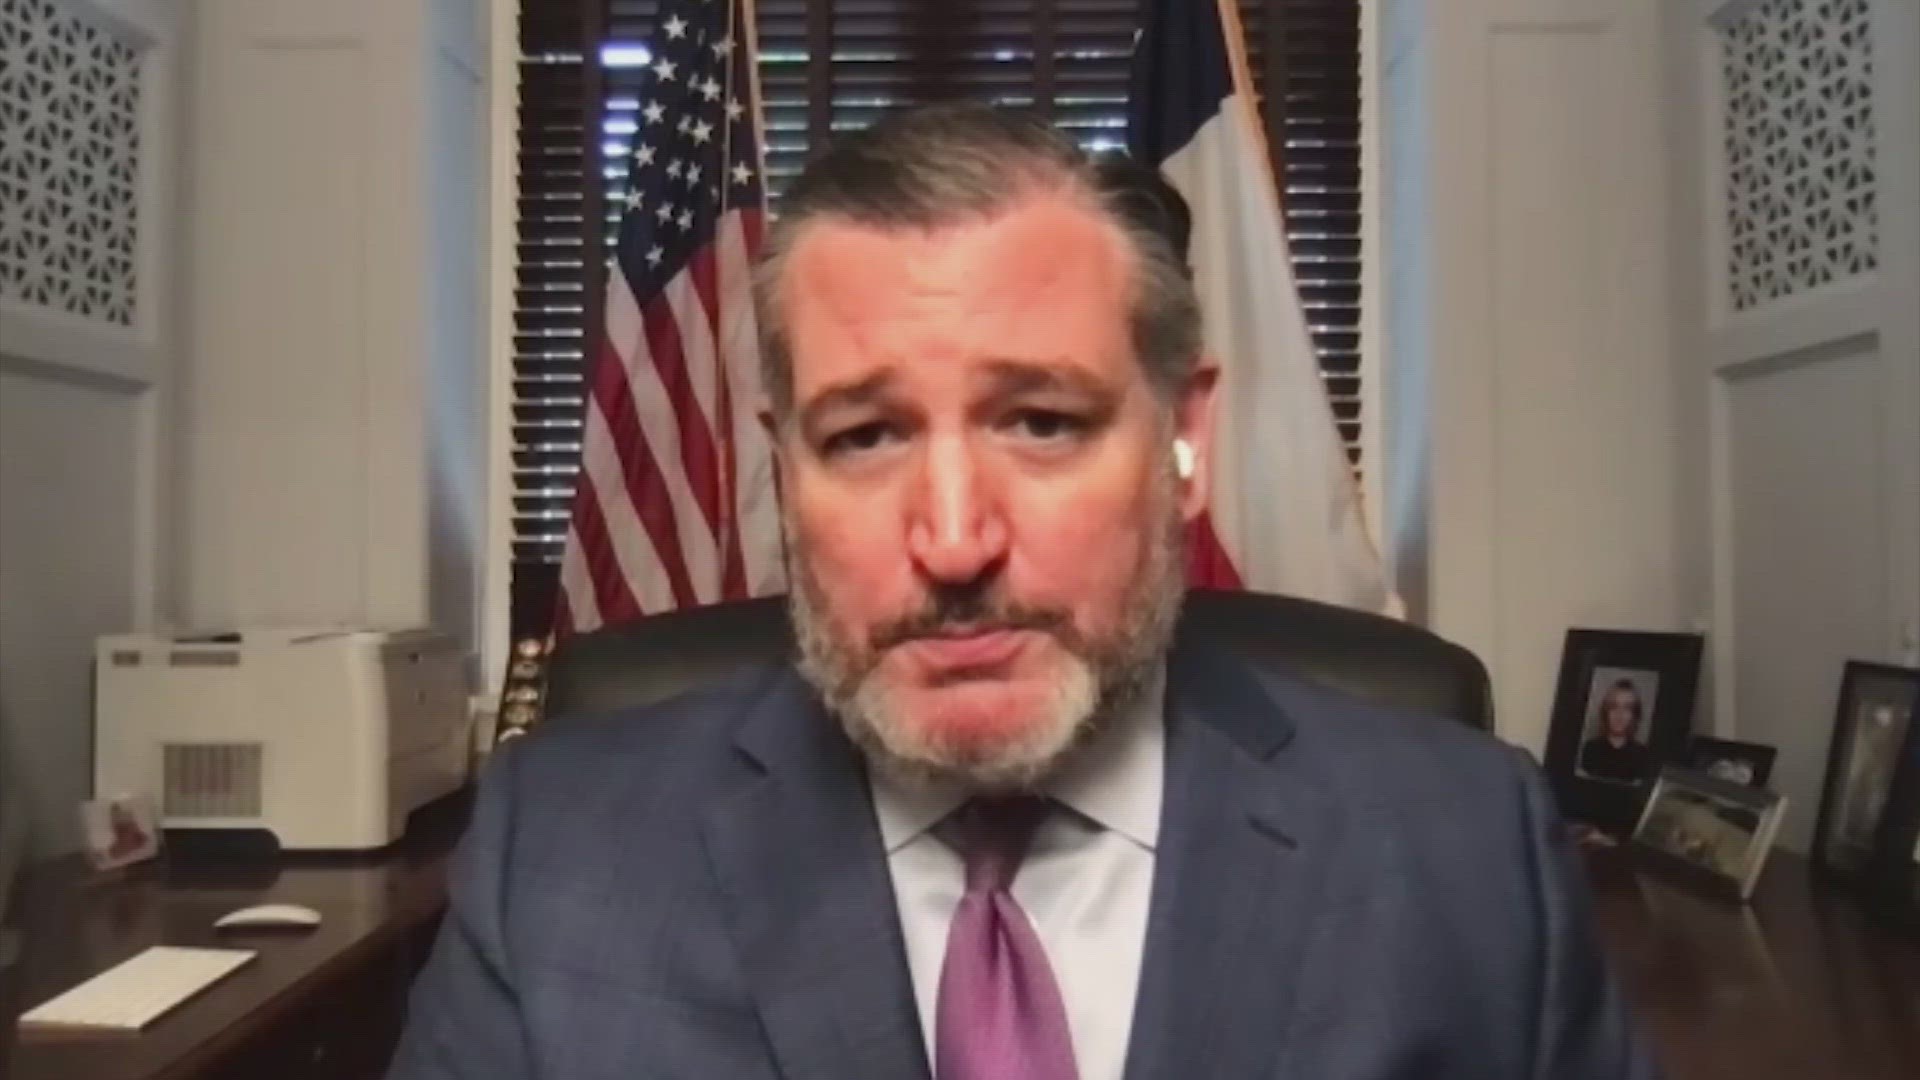 Sen. Ted Cruz said it's the border policies created by Democrats that "cause real lives to be lost."